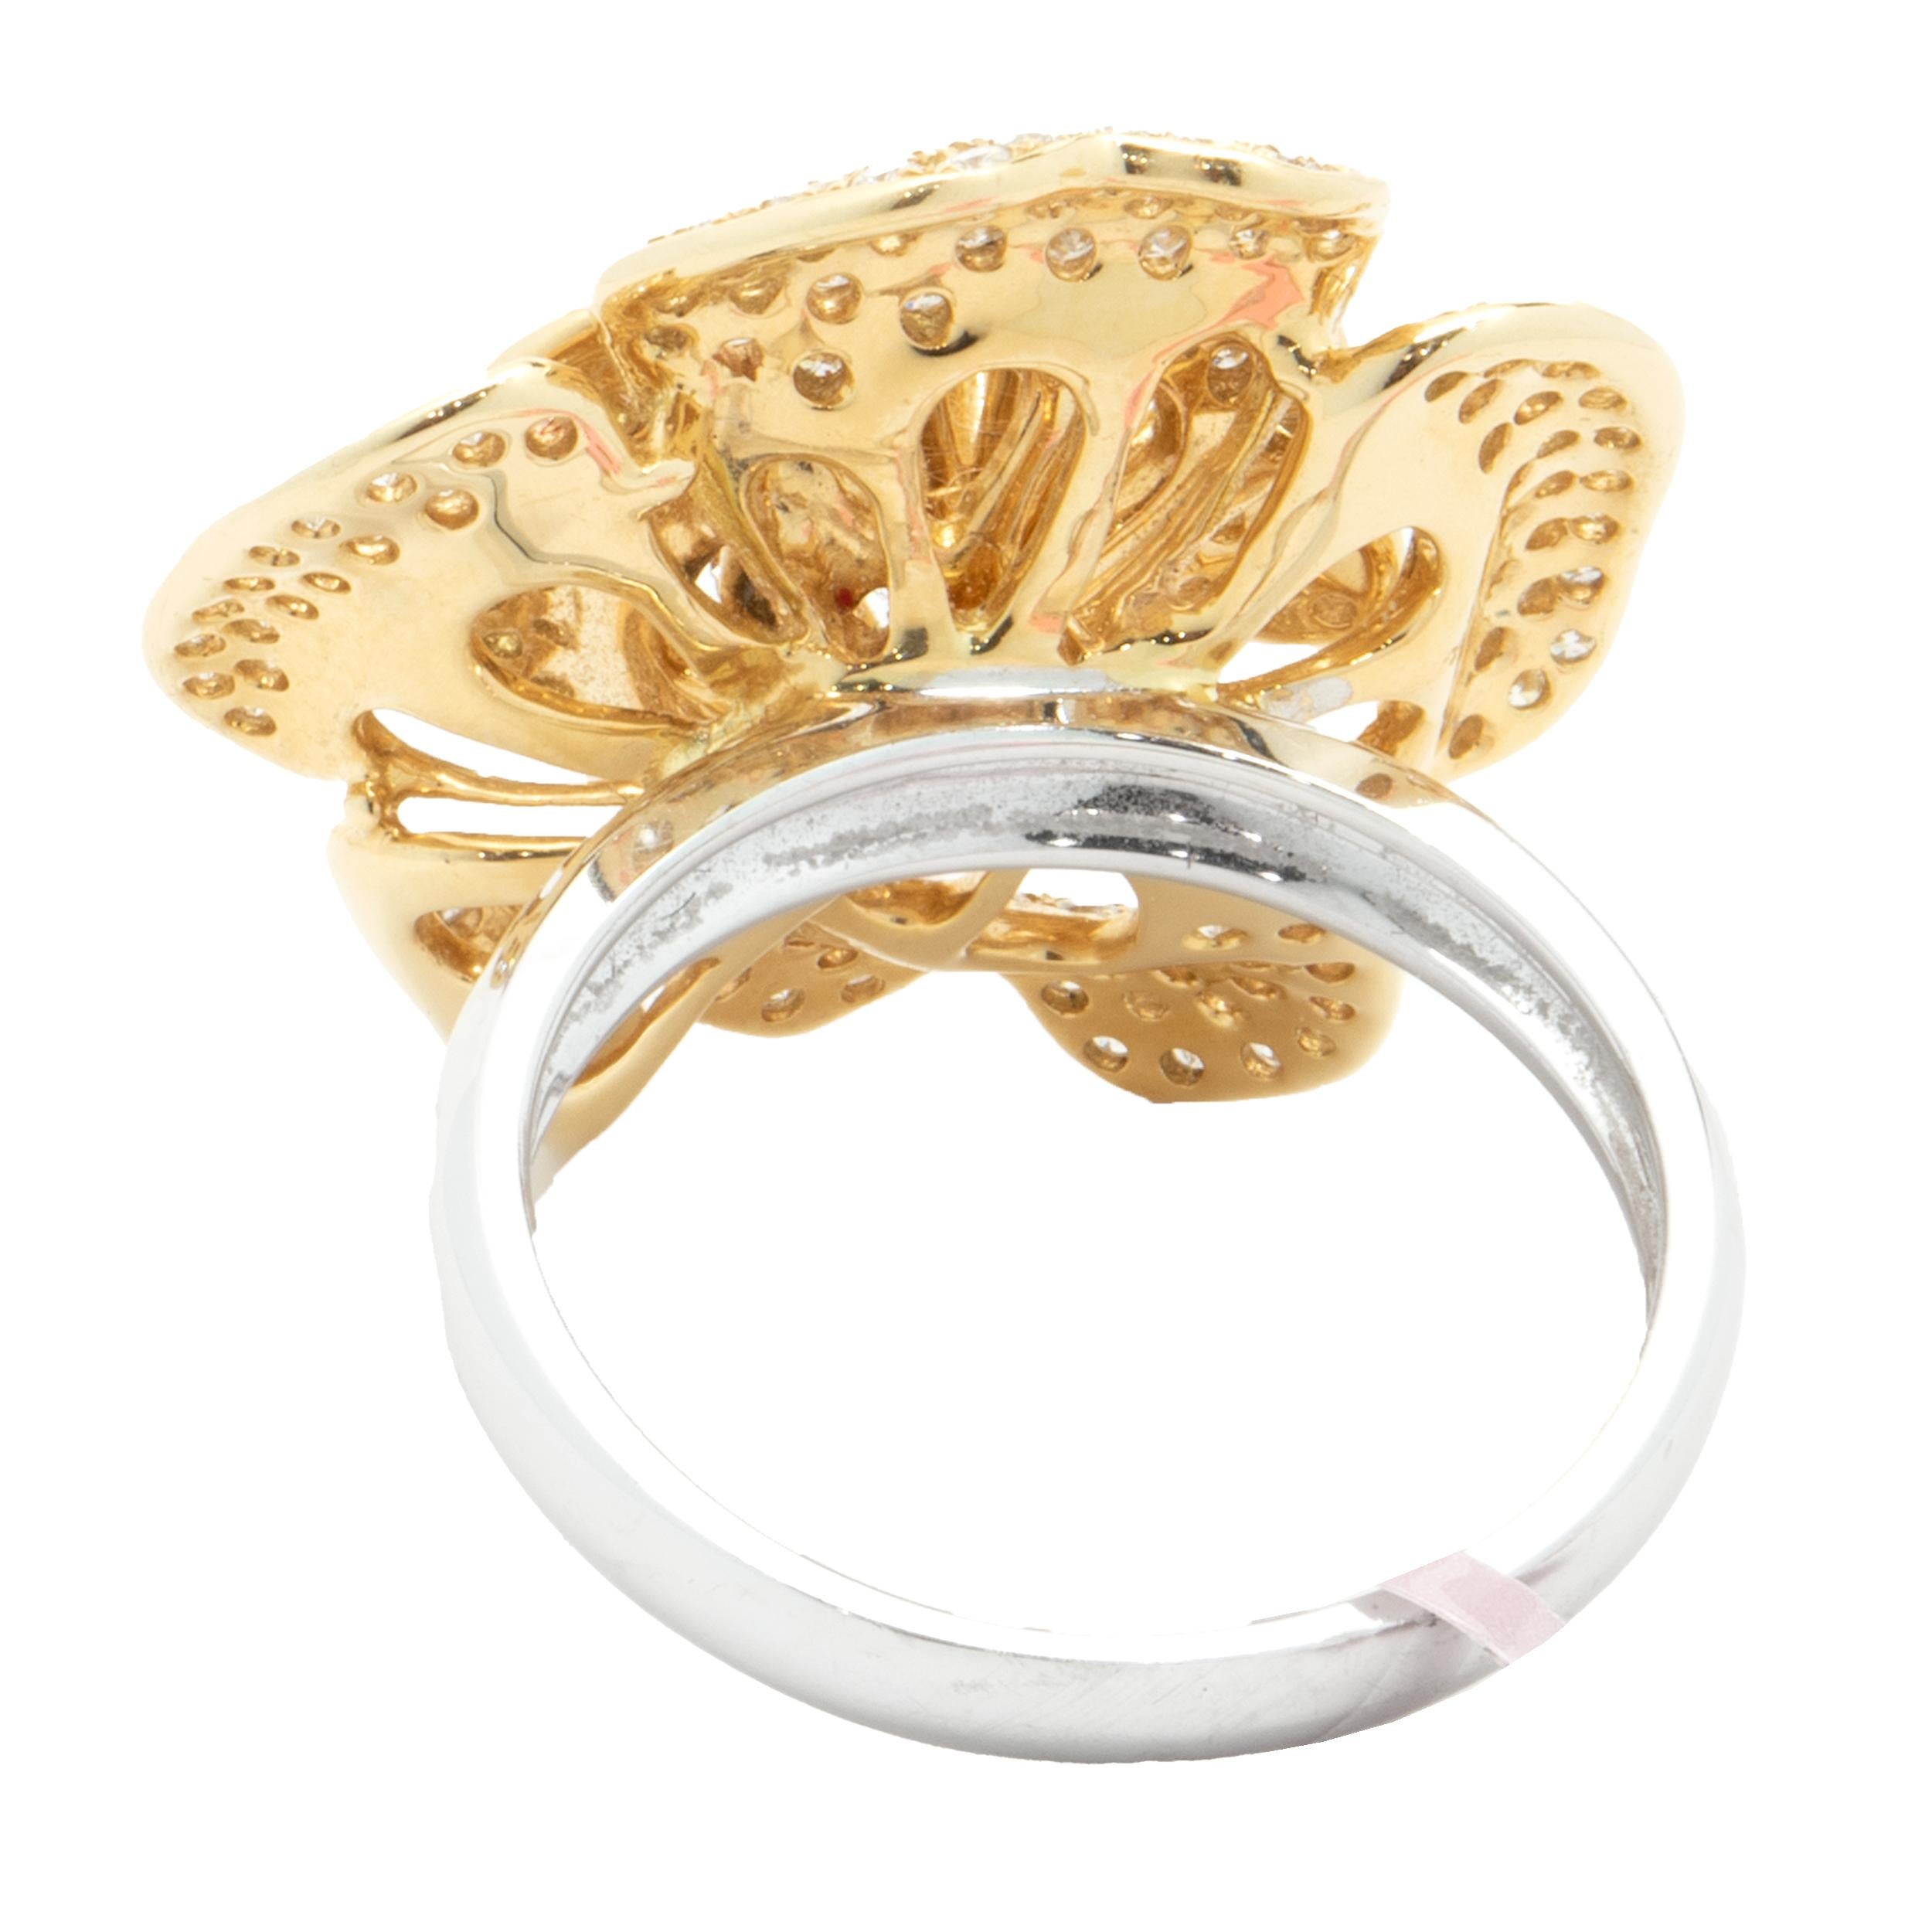 18 Karat White and Yellow Gold Pave Diamond Flower Ring In Excellent Condition For Sale In Scottsdale, AZ